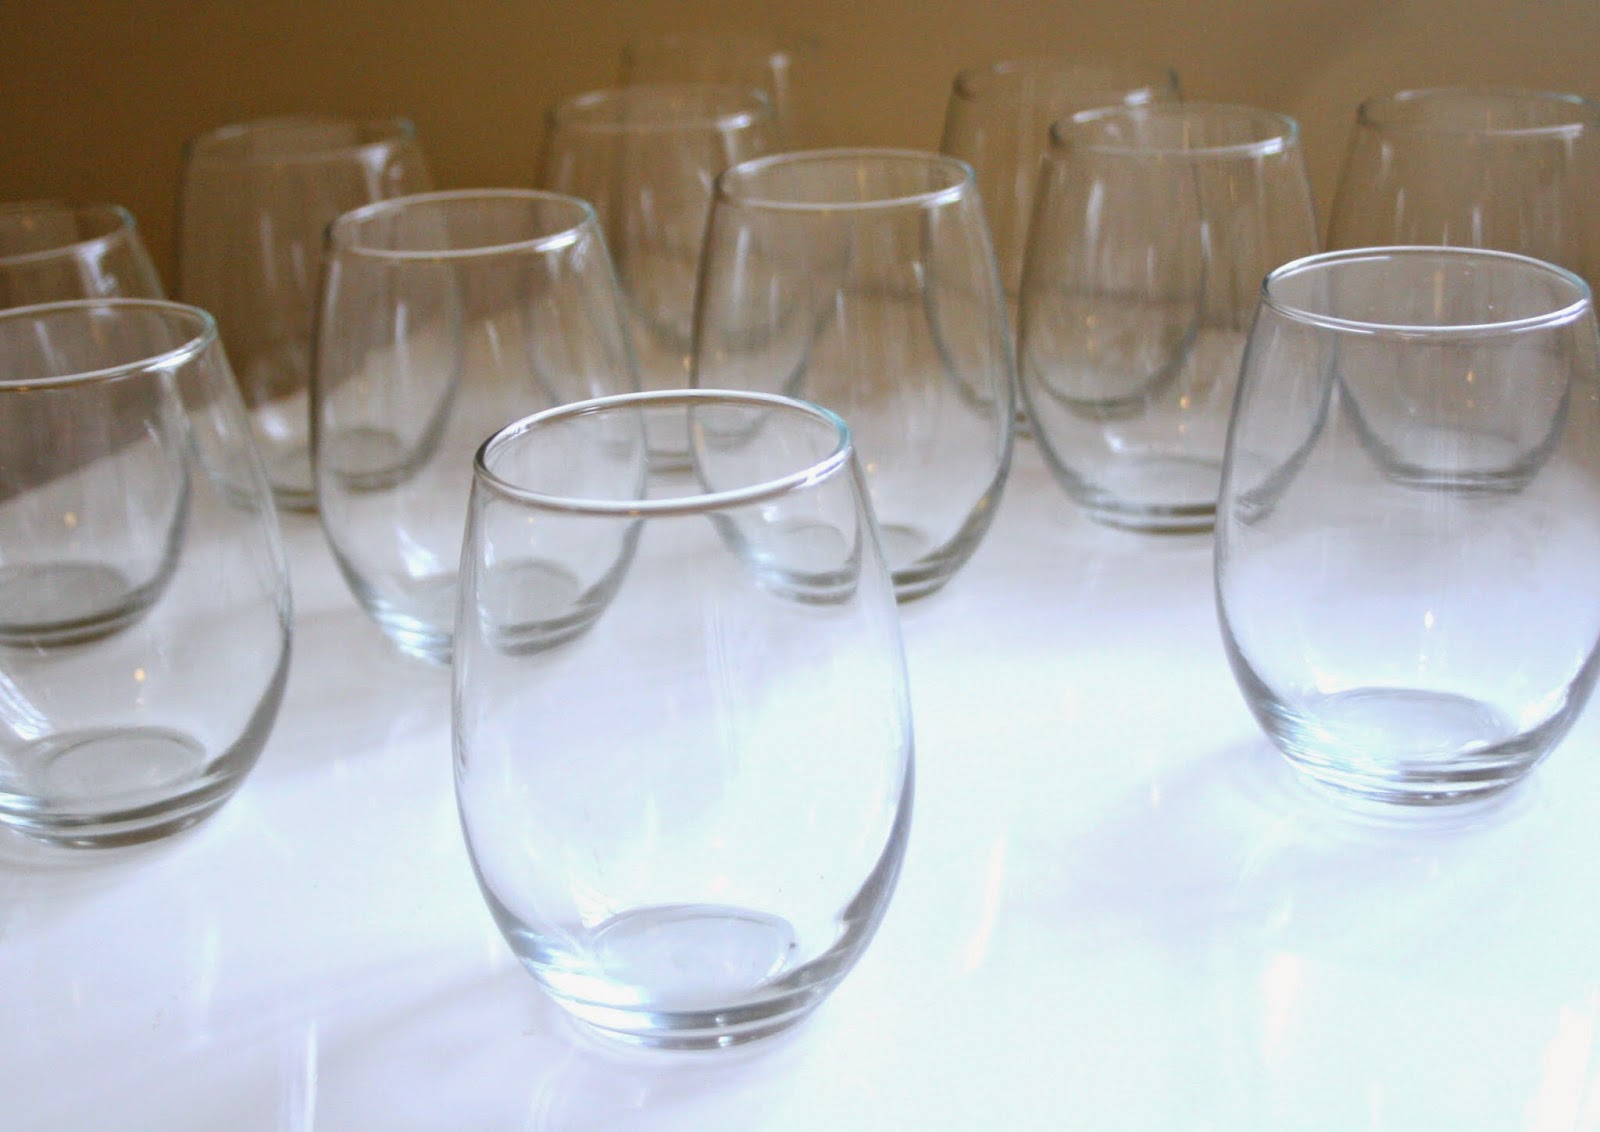 Serious about wine? You need decent wine glasses